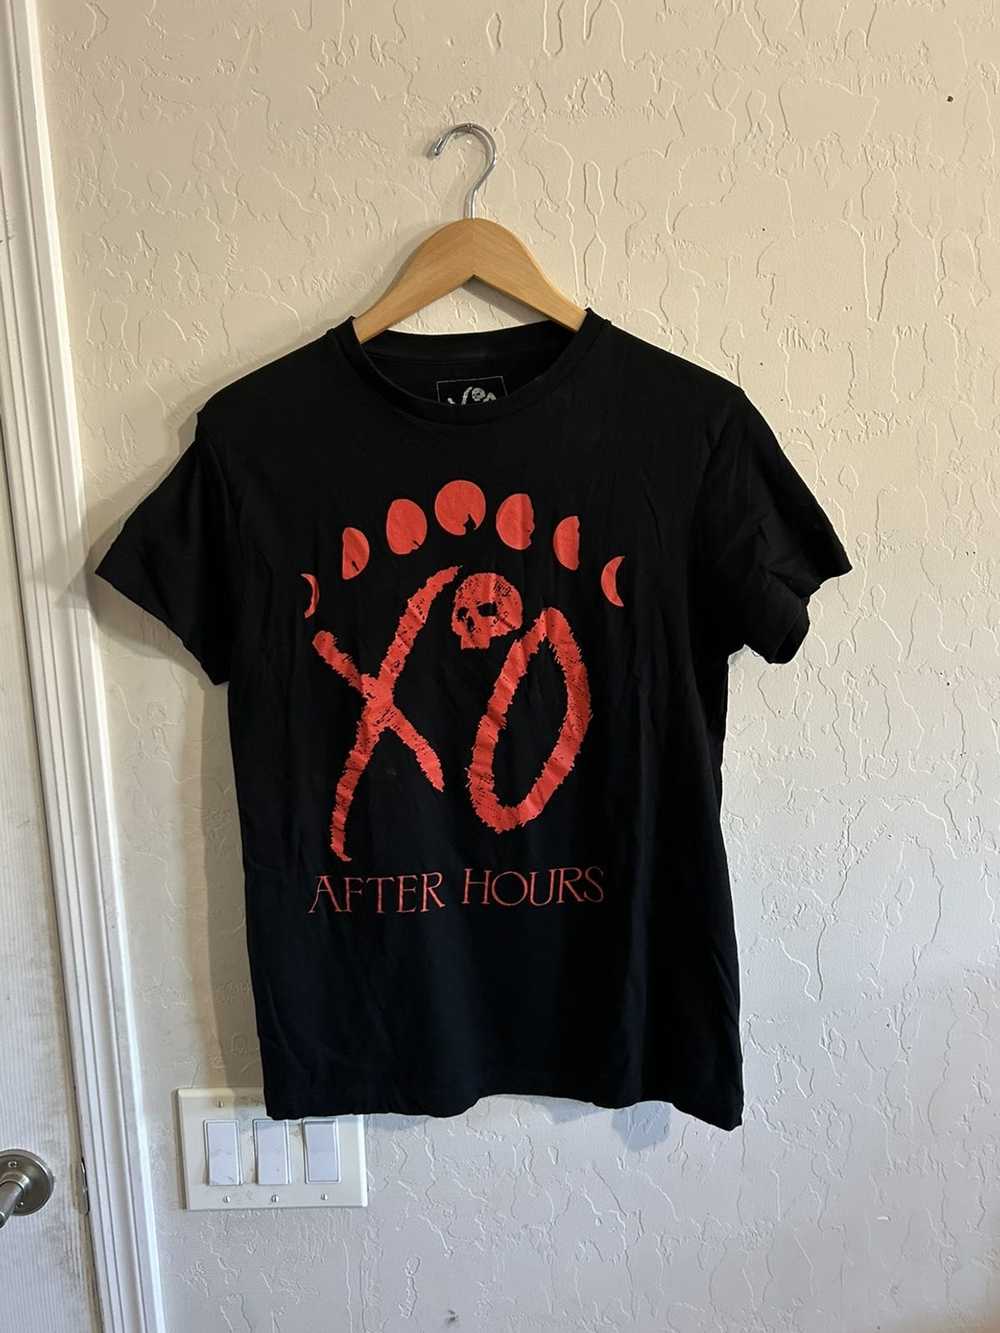 The Weeknd × XO The Weekend After Hours Shirt - image 4